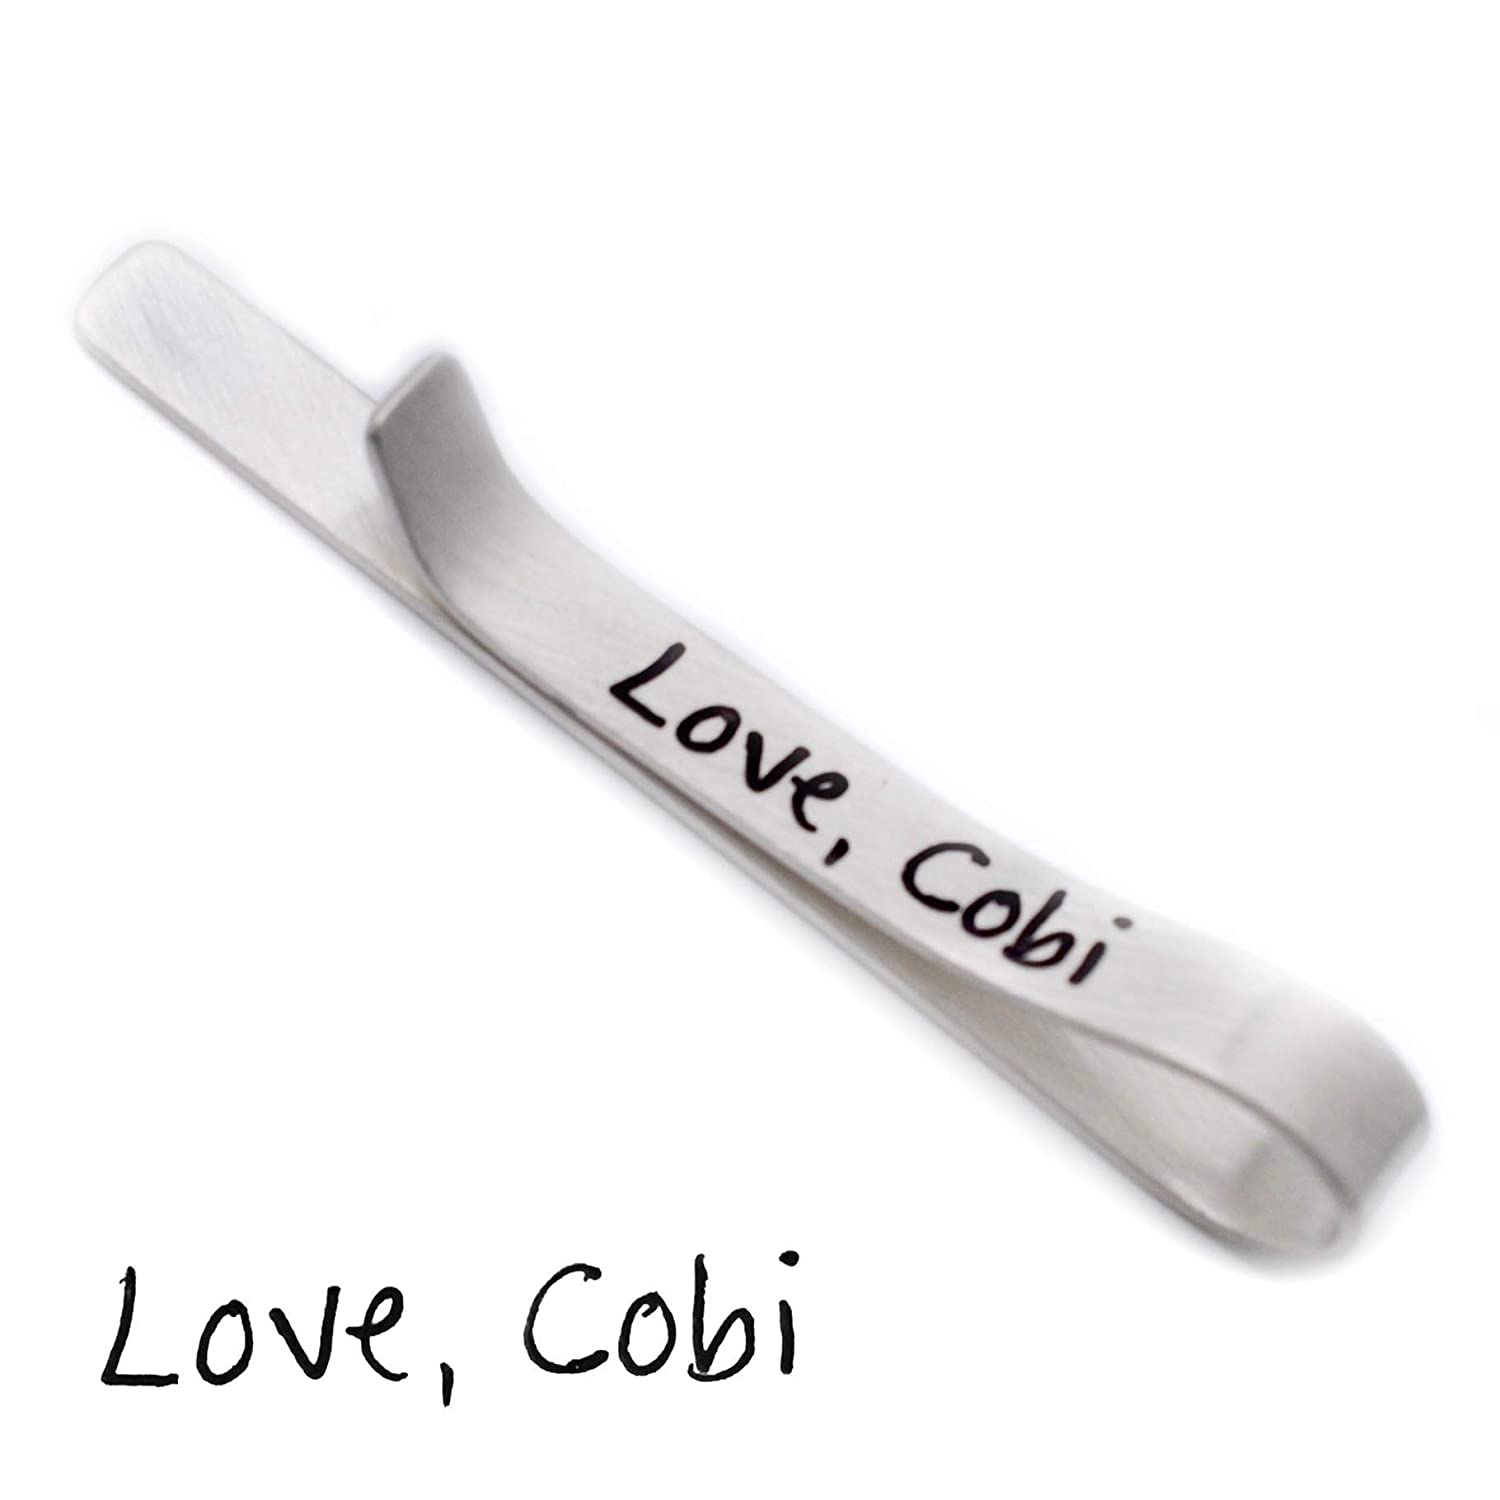 Handwriting Sterling Silver Tie Bar - Love It Personalized